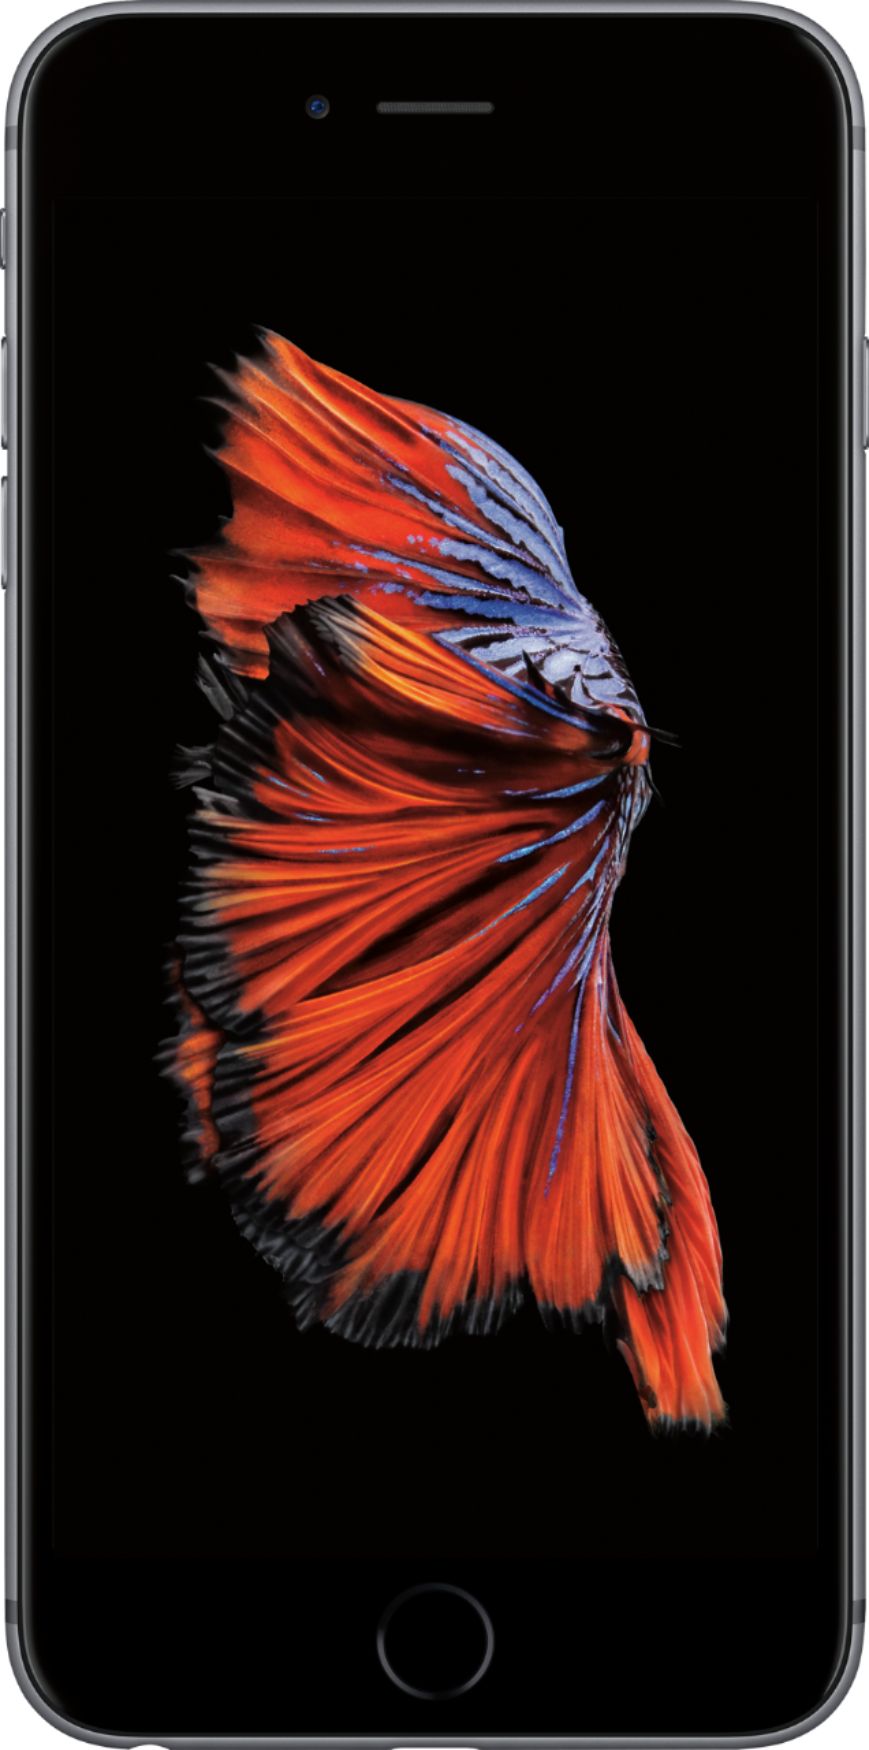 Apple iPhone 6s Plus 32GB Space Gray MN342LL/A - Best Buy